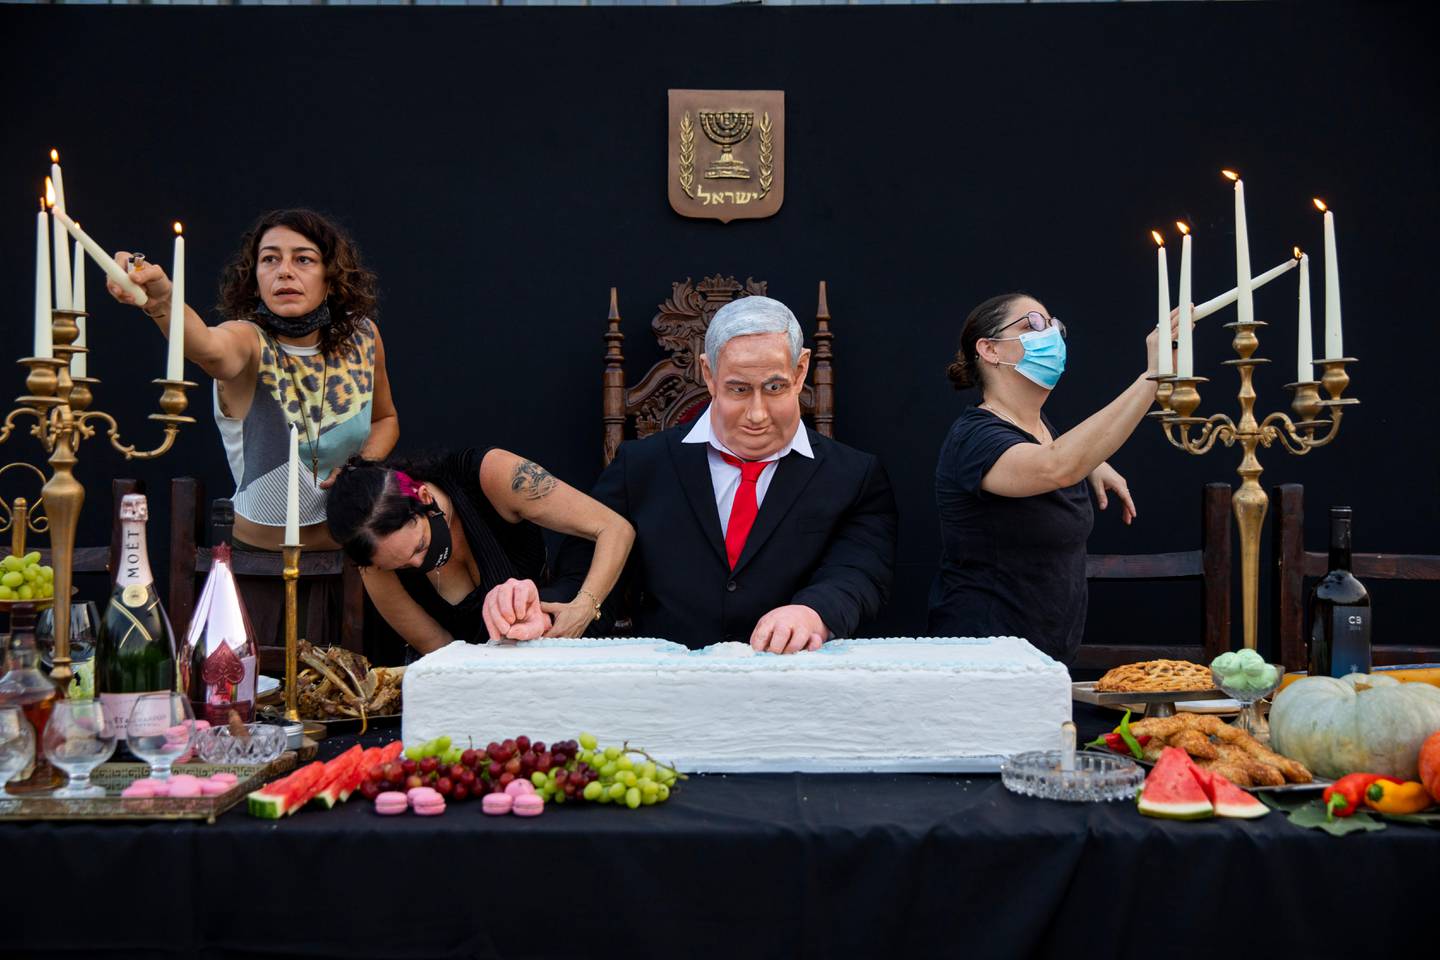 Team members of Israeli artist Itay Zalait, work on an installation depicting Prime Minister Benjamin Netanyahu at a mock "Last Supper" at Rabin square in Tel Aviv, Israel, Wednesday, July 29, 2020. The installation, placed in a central Tel Aviv square on Wednesday, in the latest twist in a summer of protests against Netanyahu and his lengthy rule. (AP Photo/Oded Balilty)